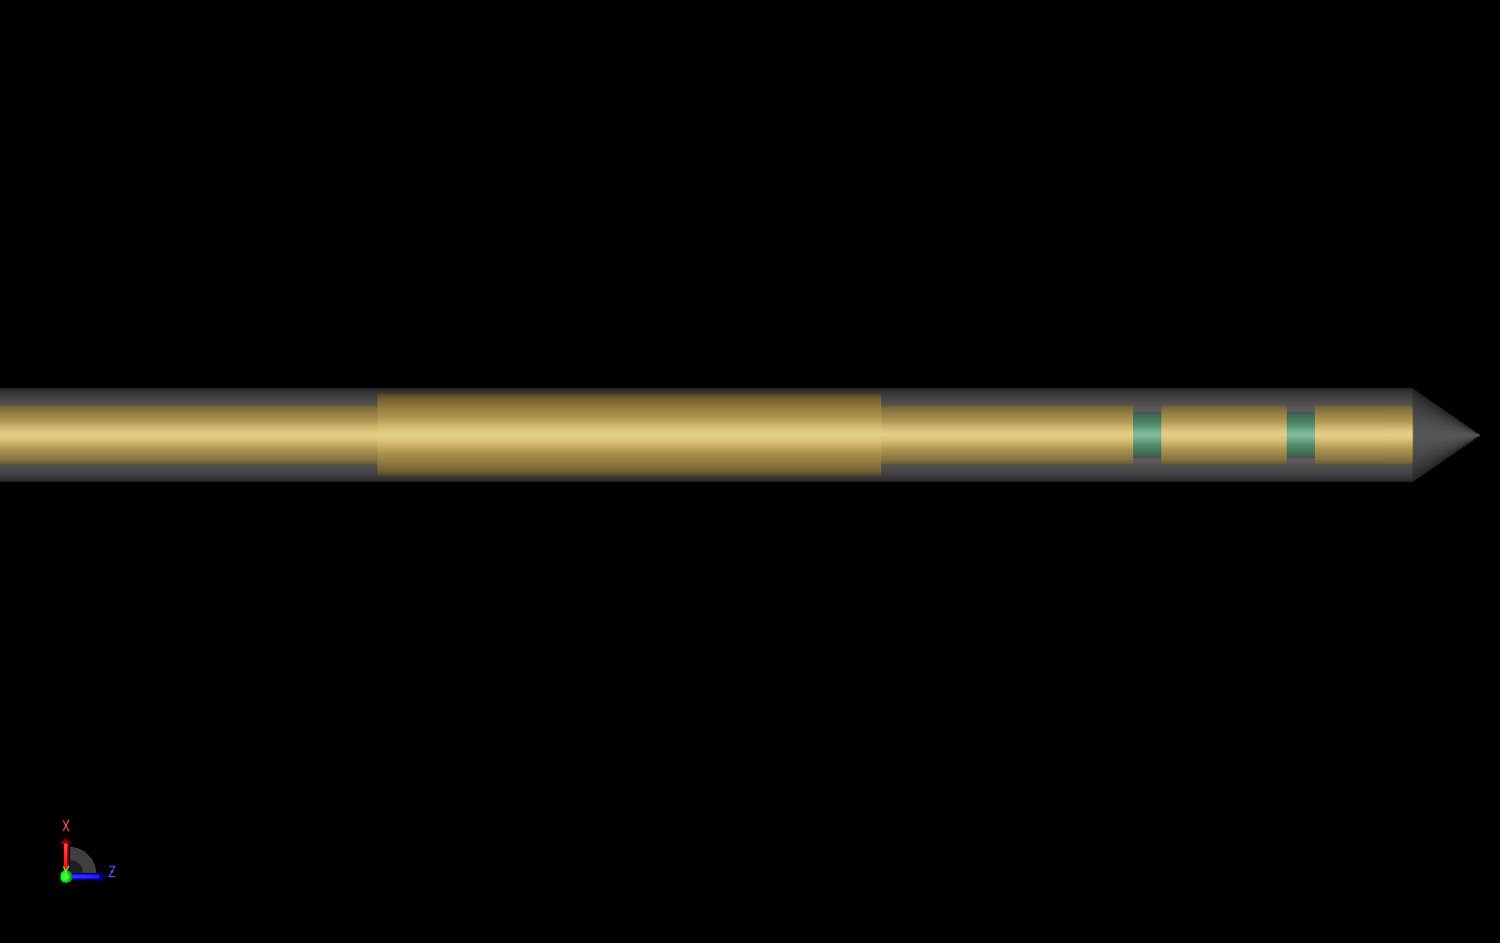 Figure 1: Shown is the CAD representation of the double slot choked antenna. The dielectric catheter is shown semi-transparent to allow viewing of the internal structure.